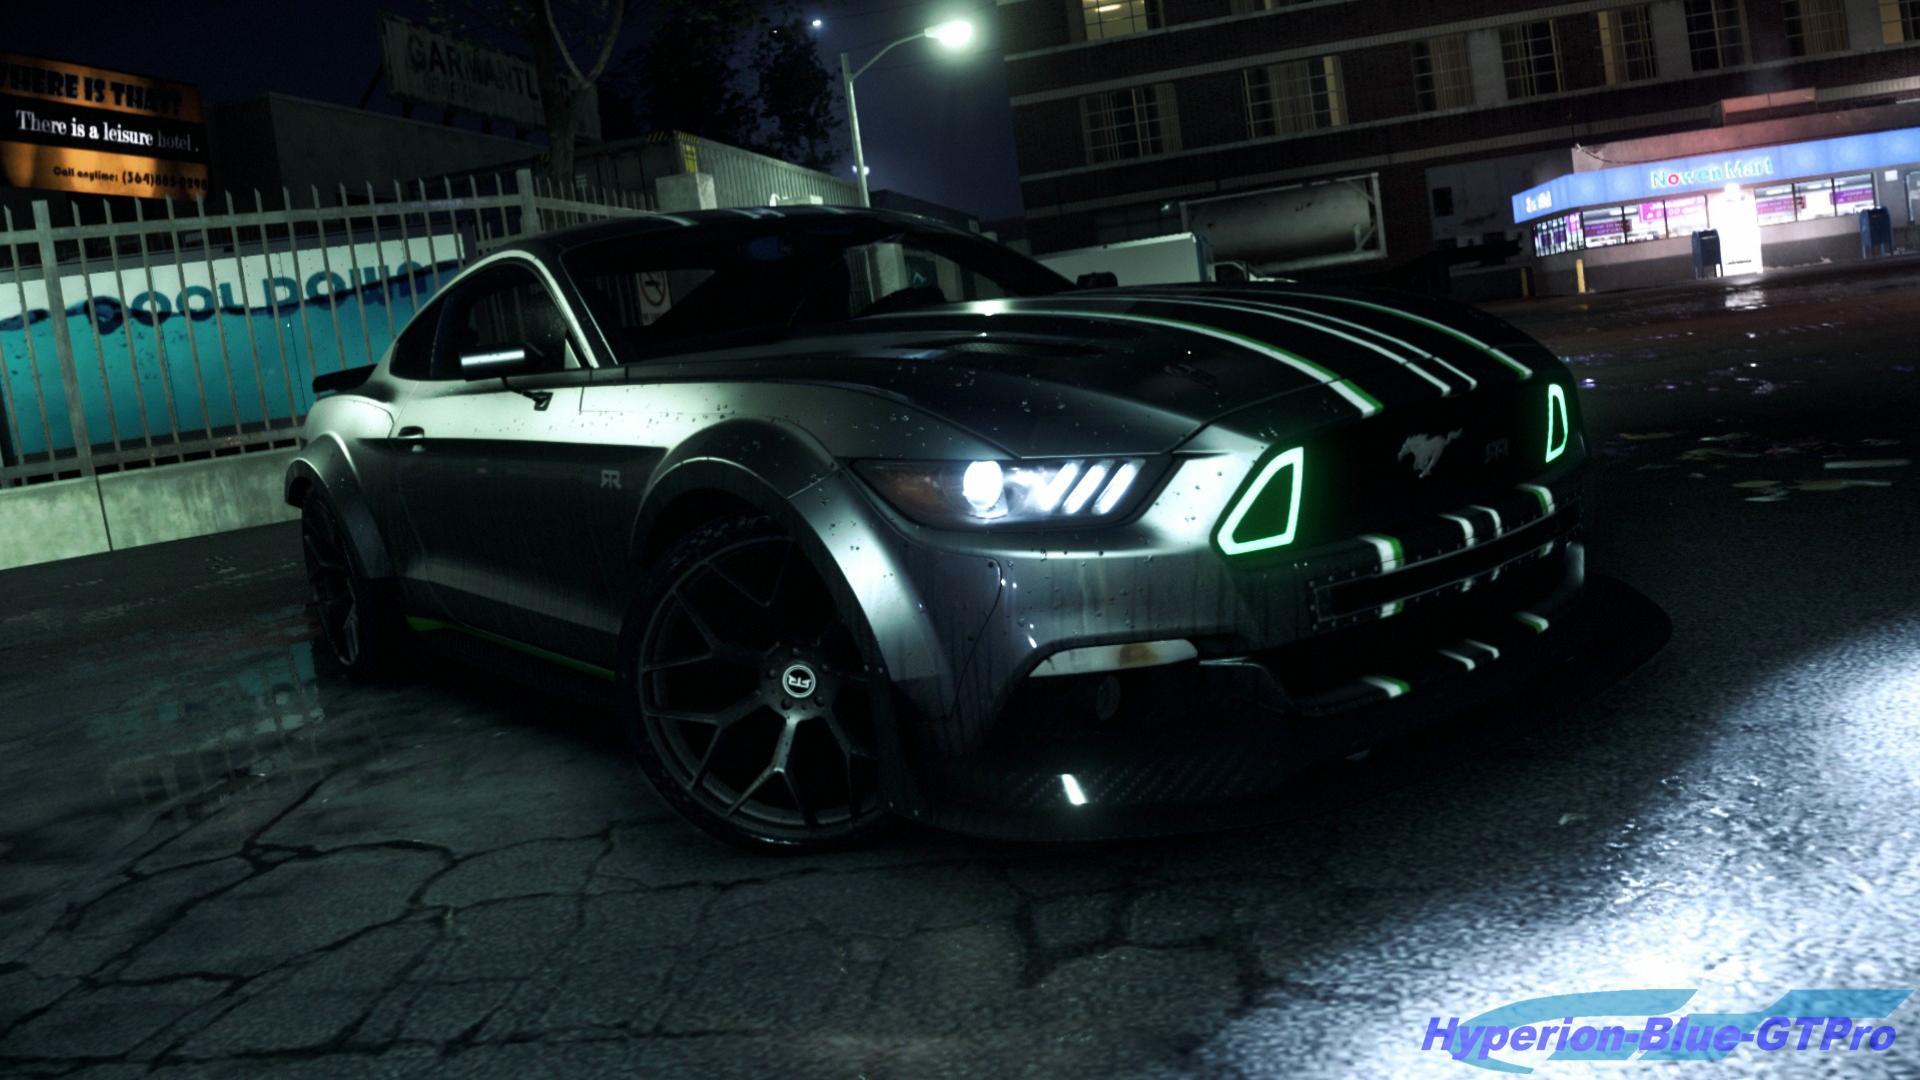 Need For Speed Mustang Wallpapers Top Free Need For Speed Mustang Backgrounds Wallpaperaccess